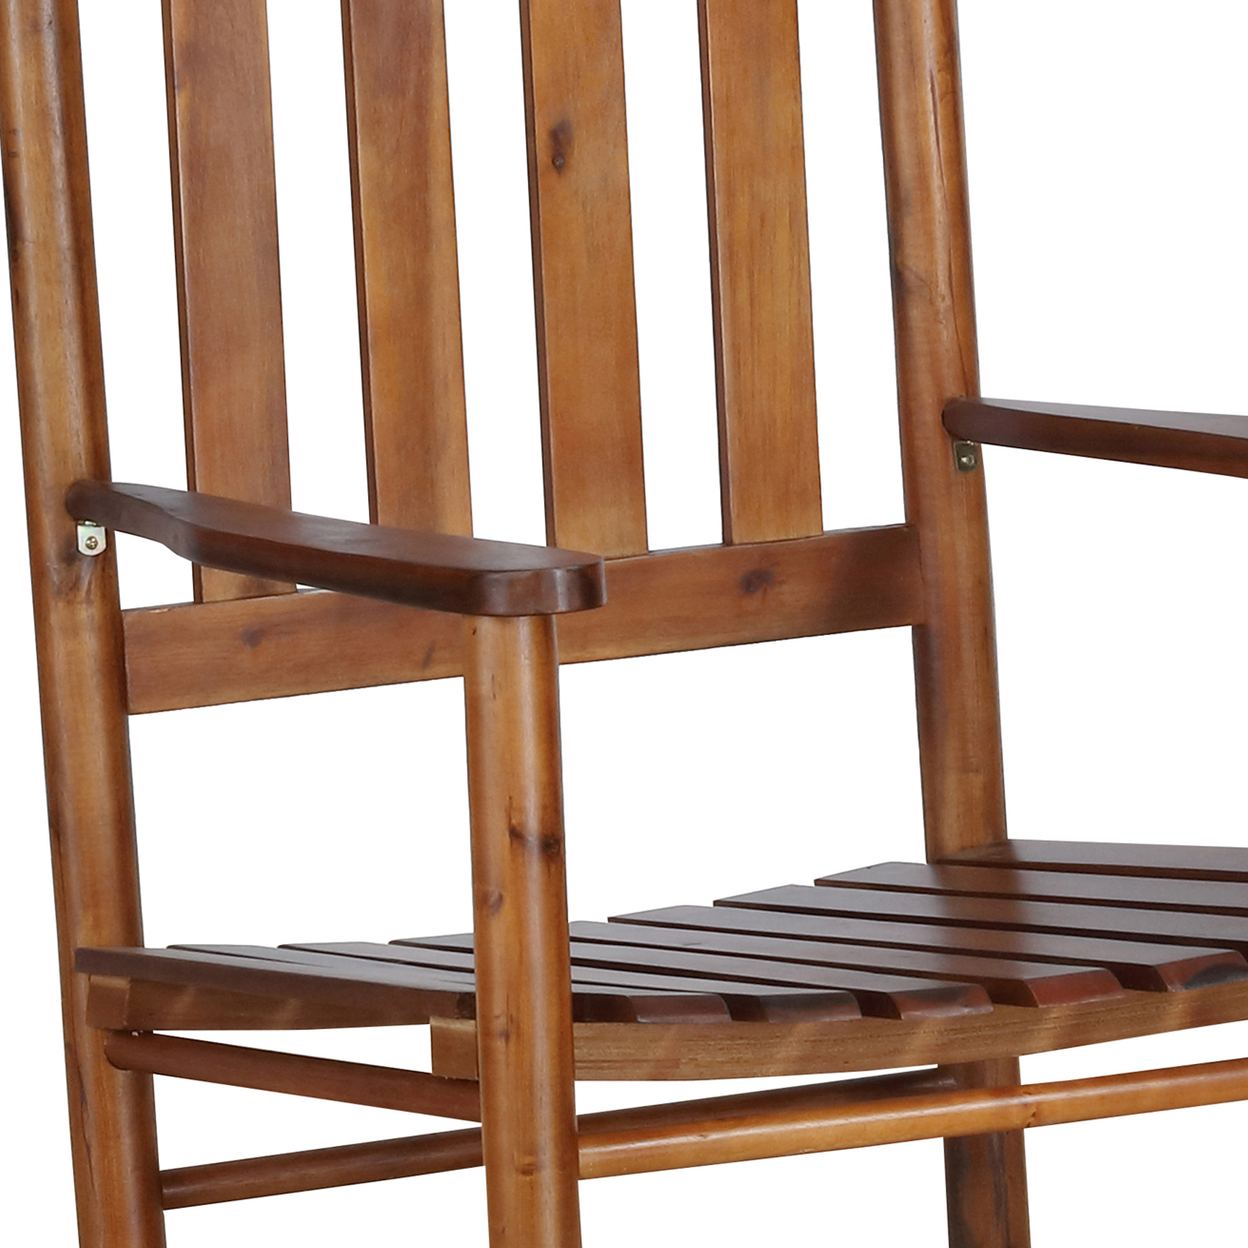 Wooden Rocking Chair With Slat Back And Mission Style, Brown- Saltoro Sherpi